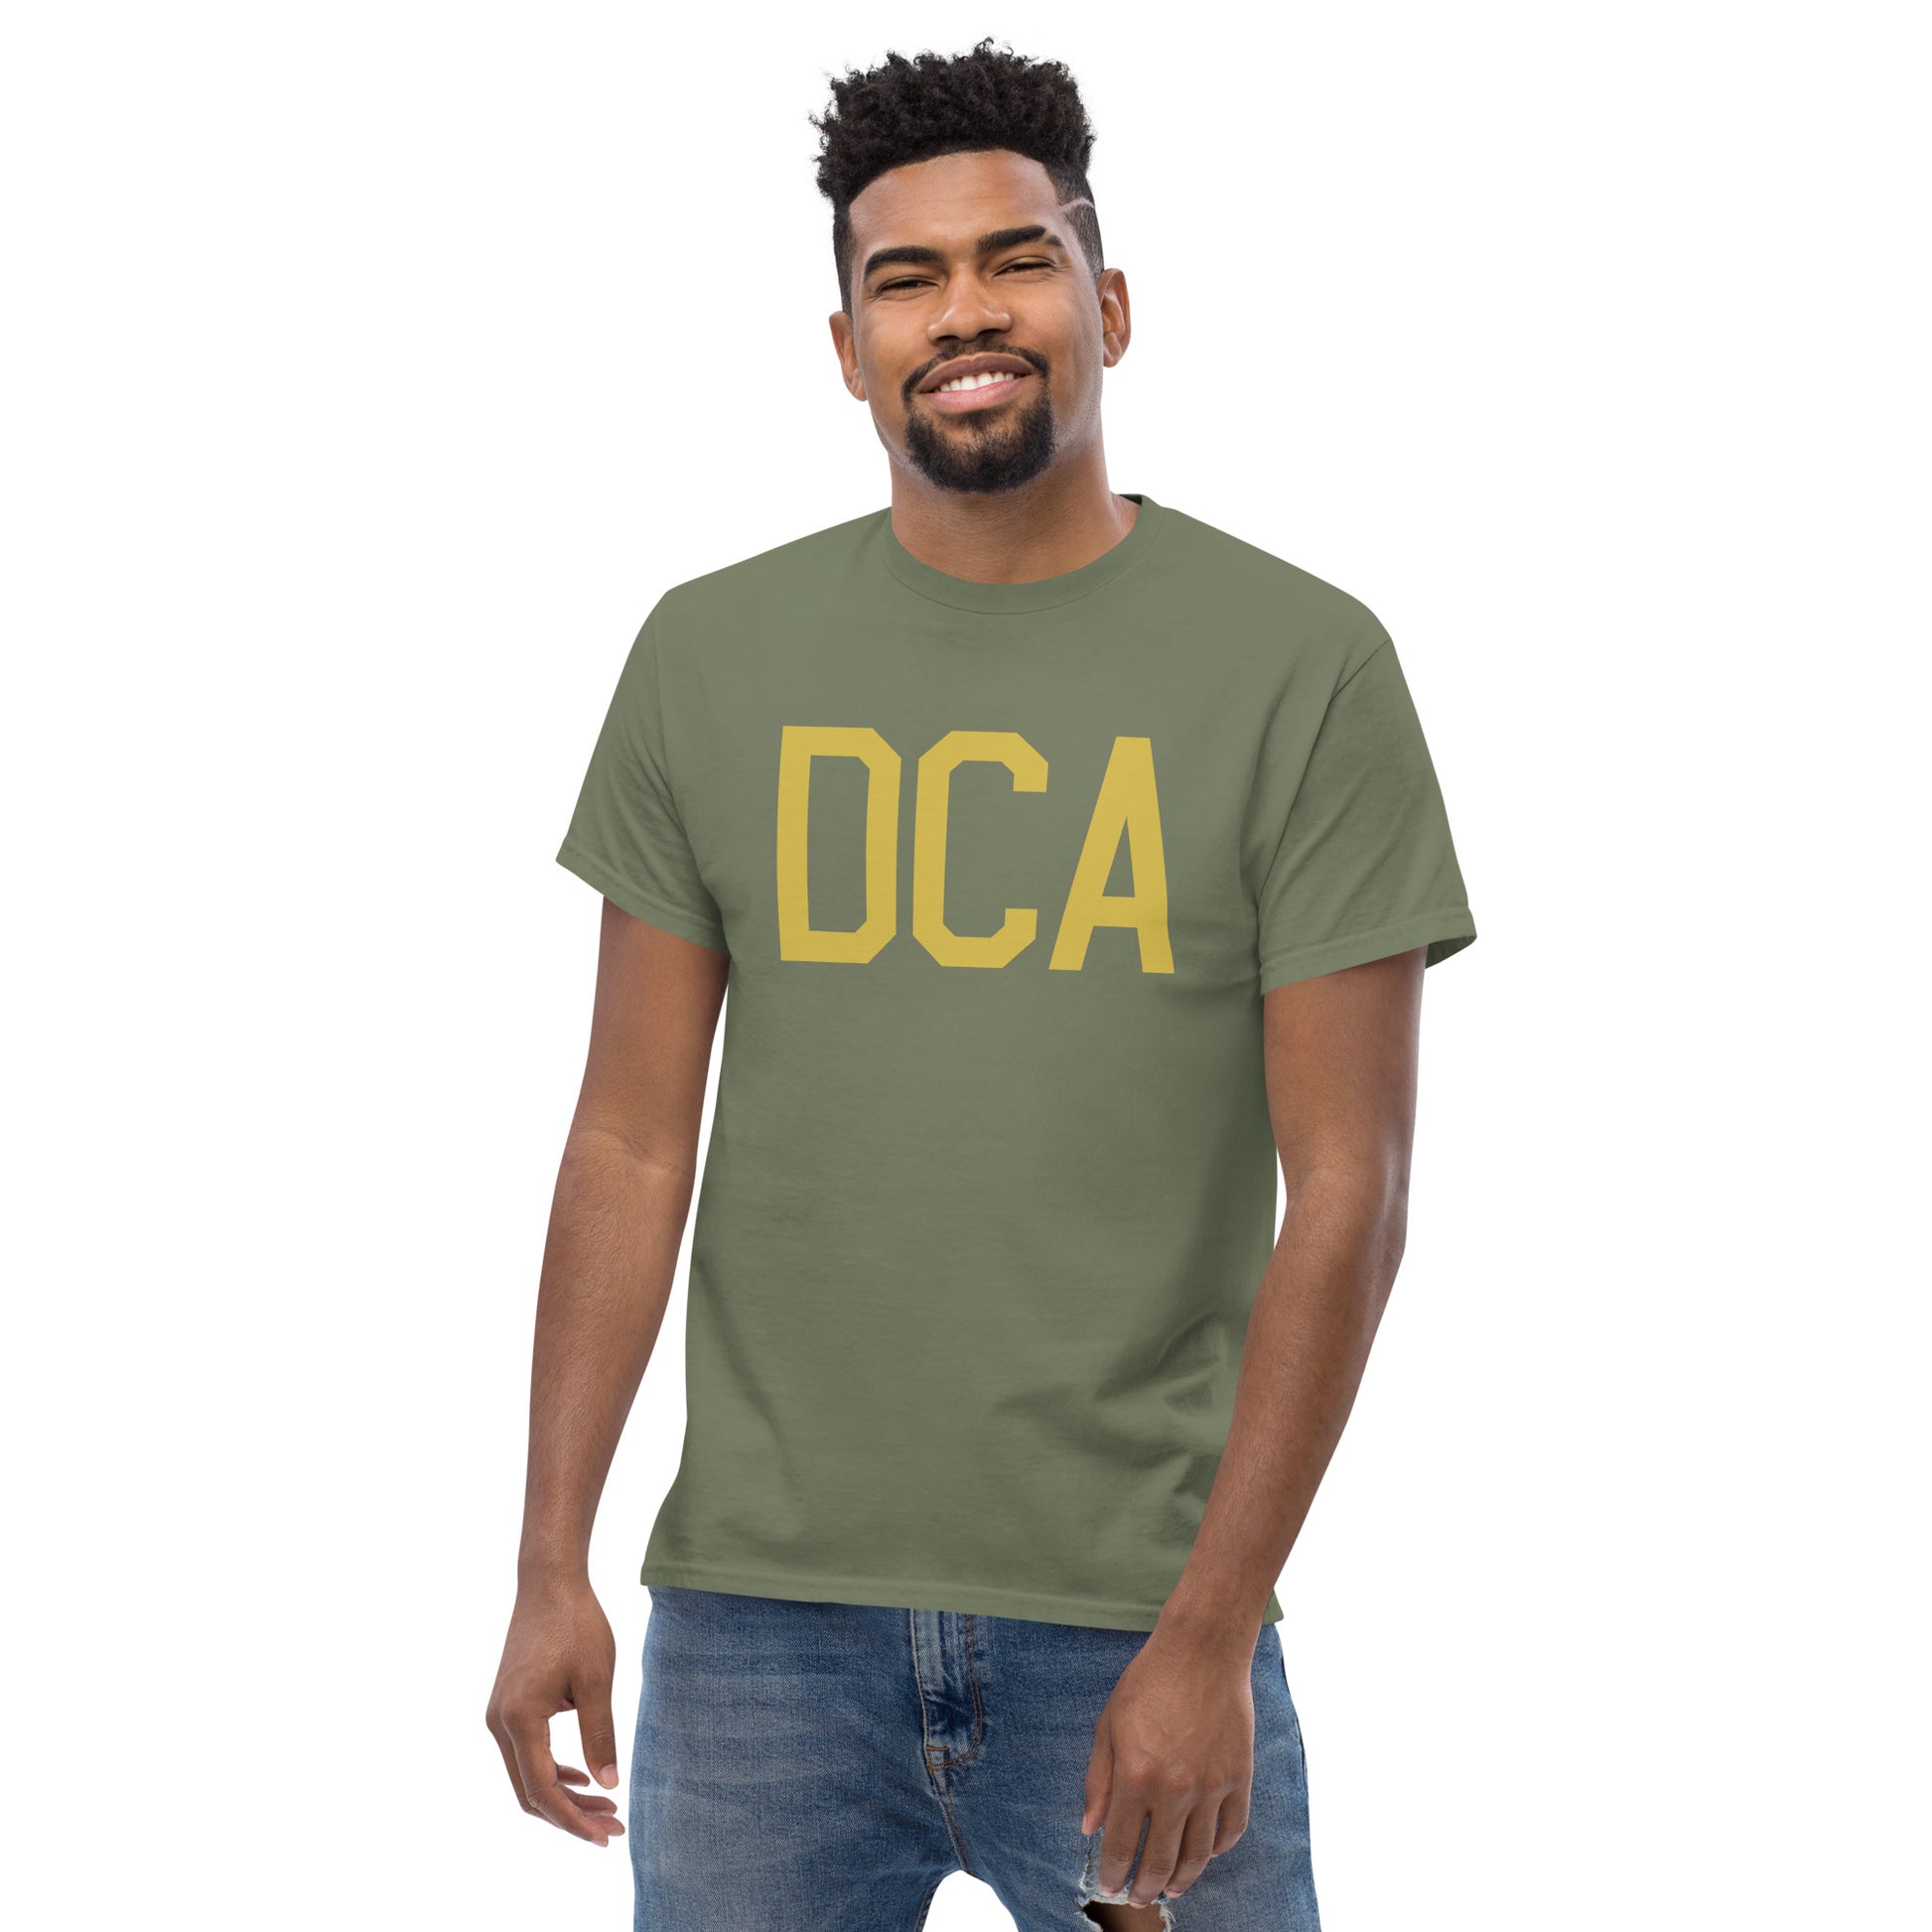 Aviation Enthusiast Men's Tee - Old Gold Graphic • DCA Washington • YHM Designs - Image 06